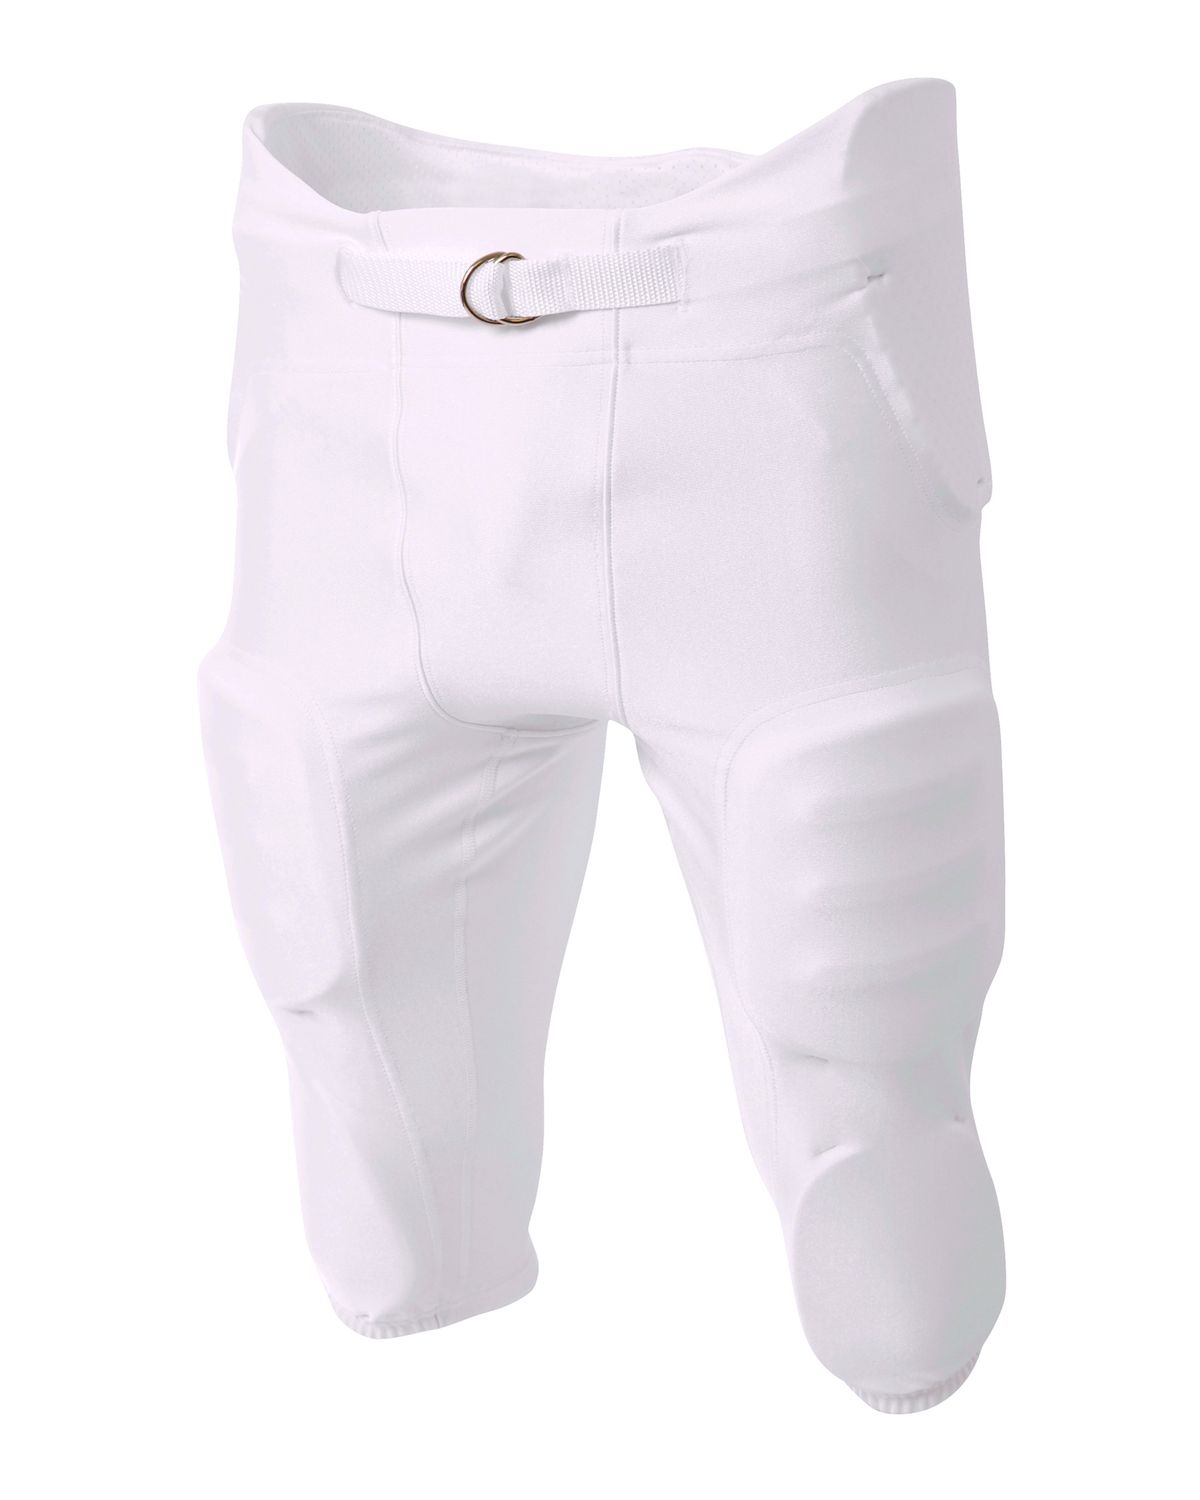 'A4 N6198 Men's Integrated Zone Football Pant'